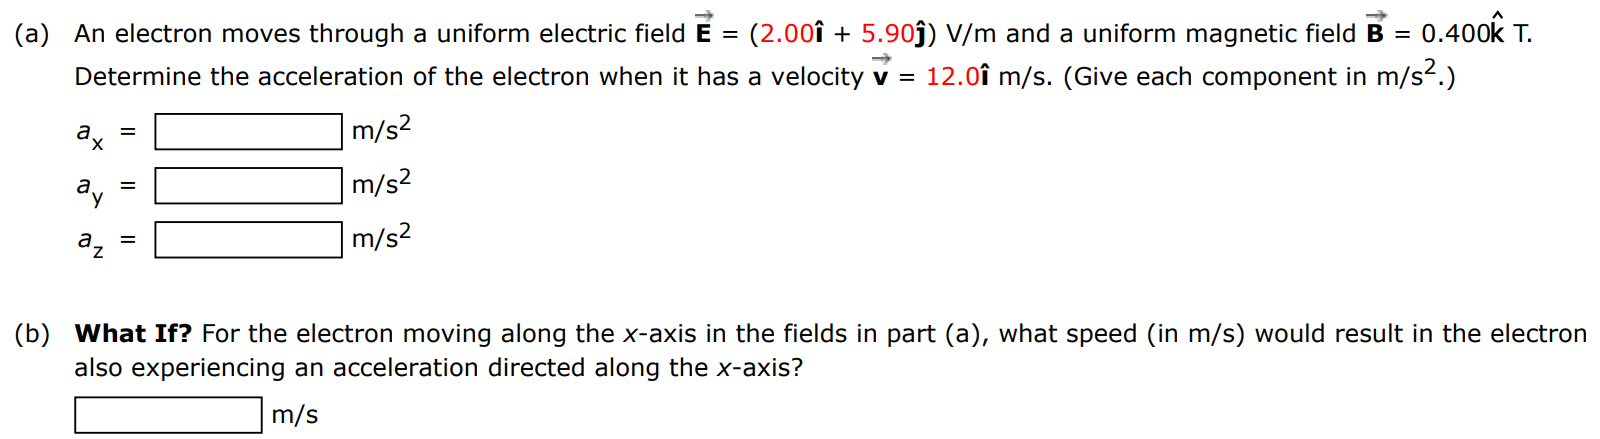 (a) An electron moves through a uniform electric field E→ = (2.00 i^ + 5.90 j^) V/m and a uniform magnetic field B→ = 0.400 k^ T. Determine the acceleration of the electron when it has a velocity v→ = 12.0 i^ m/s. (Give each component in m/s2.) ax = m/s2 ay = m/s2 az = m/s2 m/s2 (b) What If? For the electron moving along the x-axis in the fields in part (a), what speed (in m/s) would result in the electron also experiencing an acceleration directed along the x-axis? m/s